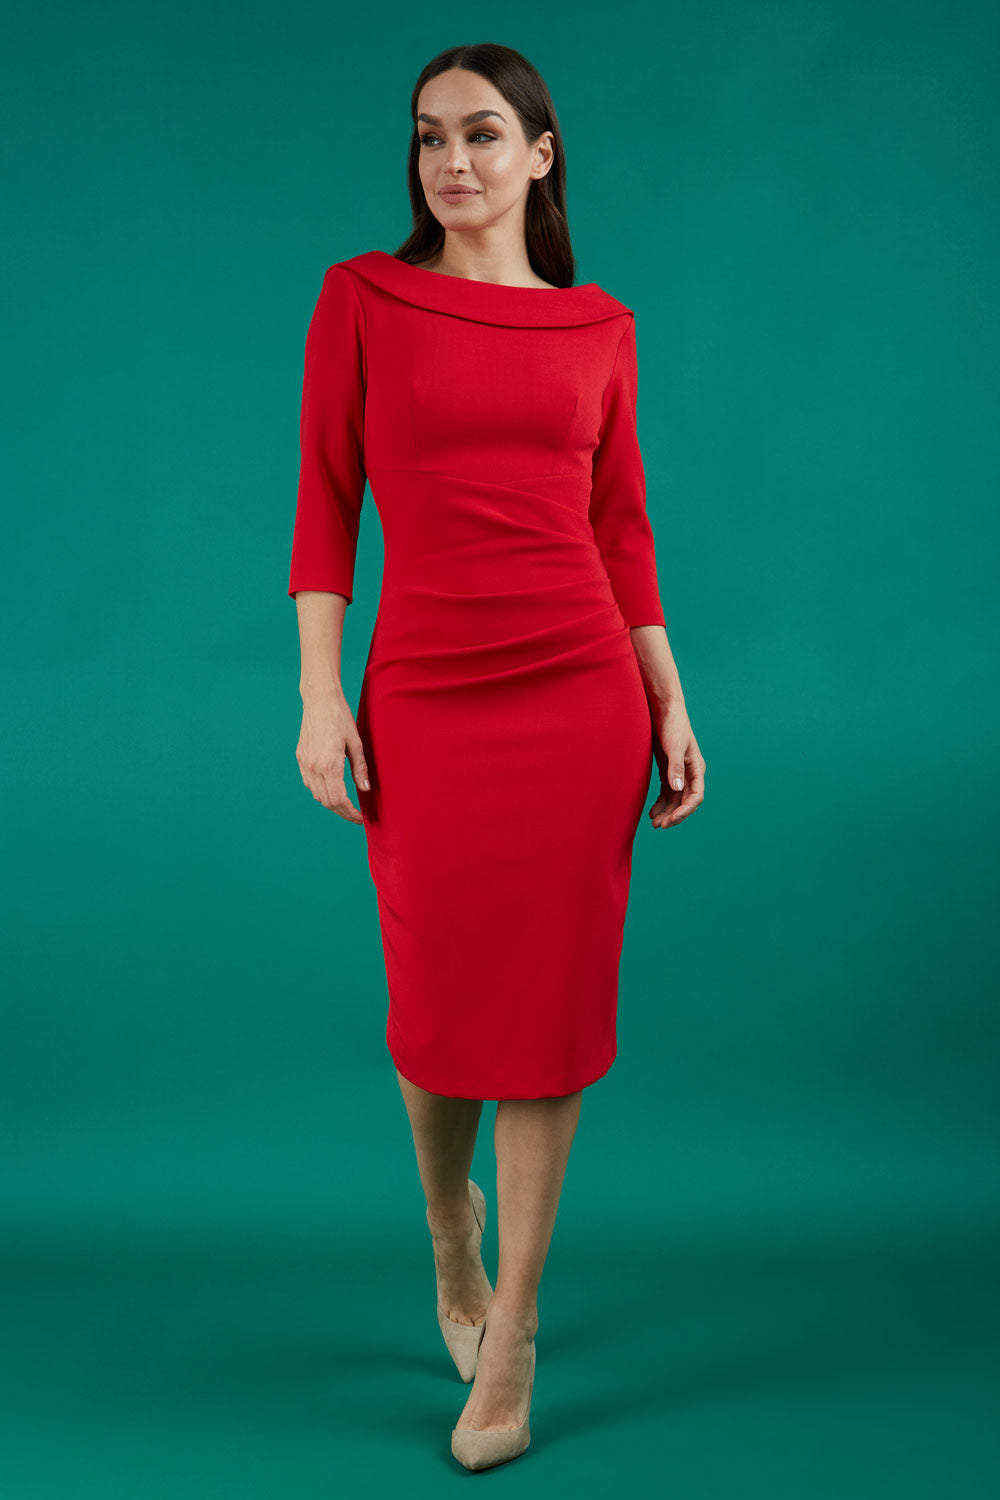 A brunette model is wearing a round neckline pencil dress with pleating on the tummy area in red front image